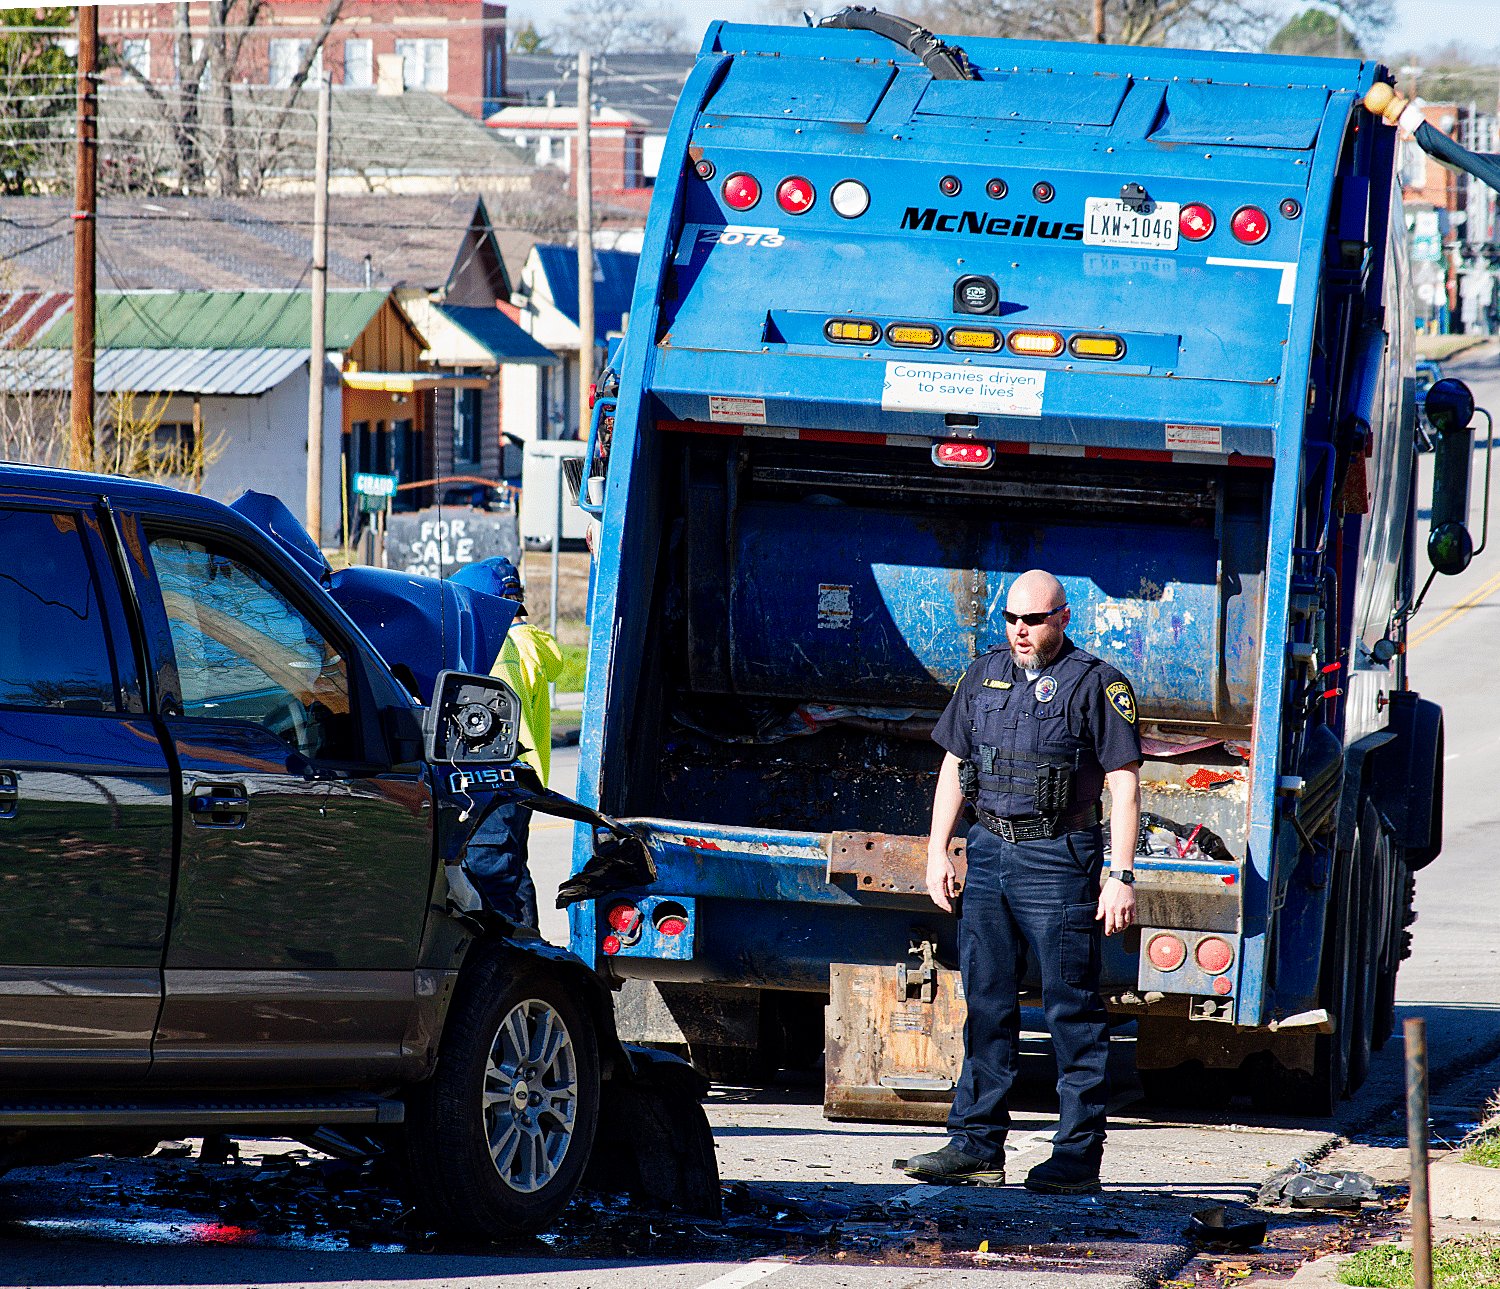 A Winnsboro man died when his pickup plowed into the back of a Republic Services trash truck in Mineola Tuesday, Feb. 14 shortly after 3 p.m. in the 700 block of S. Pacific St.

Burke Bullock, 82, was northbound on Pacific in the right lane when the crash occurred. He died at the scene.

Two trash truck crew members were uninjured.

Bullock was a well-known retired ag teacher in Winnsboro who served as a Hopkins County commissioner and for many years on the board of Wood County Electric Co-op.

His service was held Tuesday at Pine Street Baptist Church in Winnsboro.